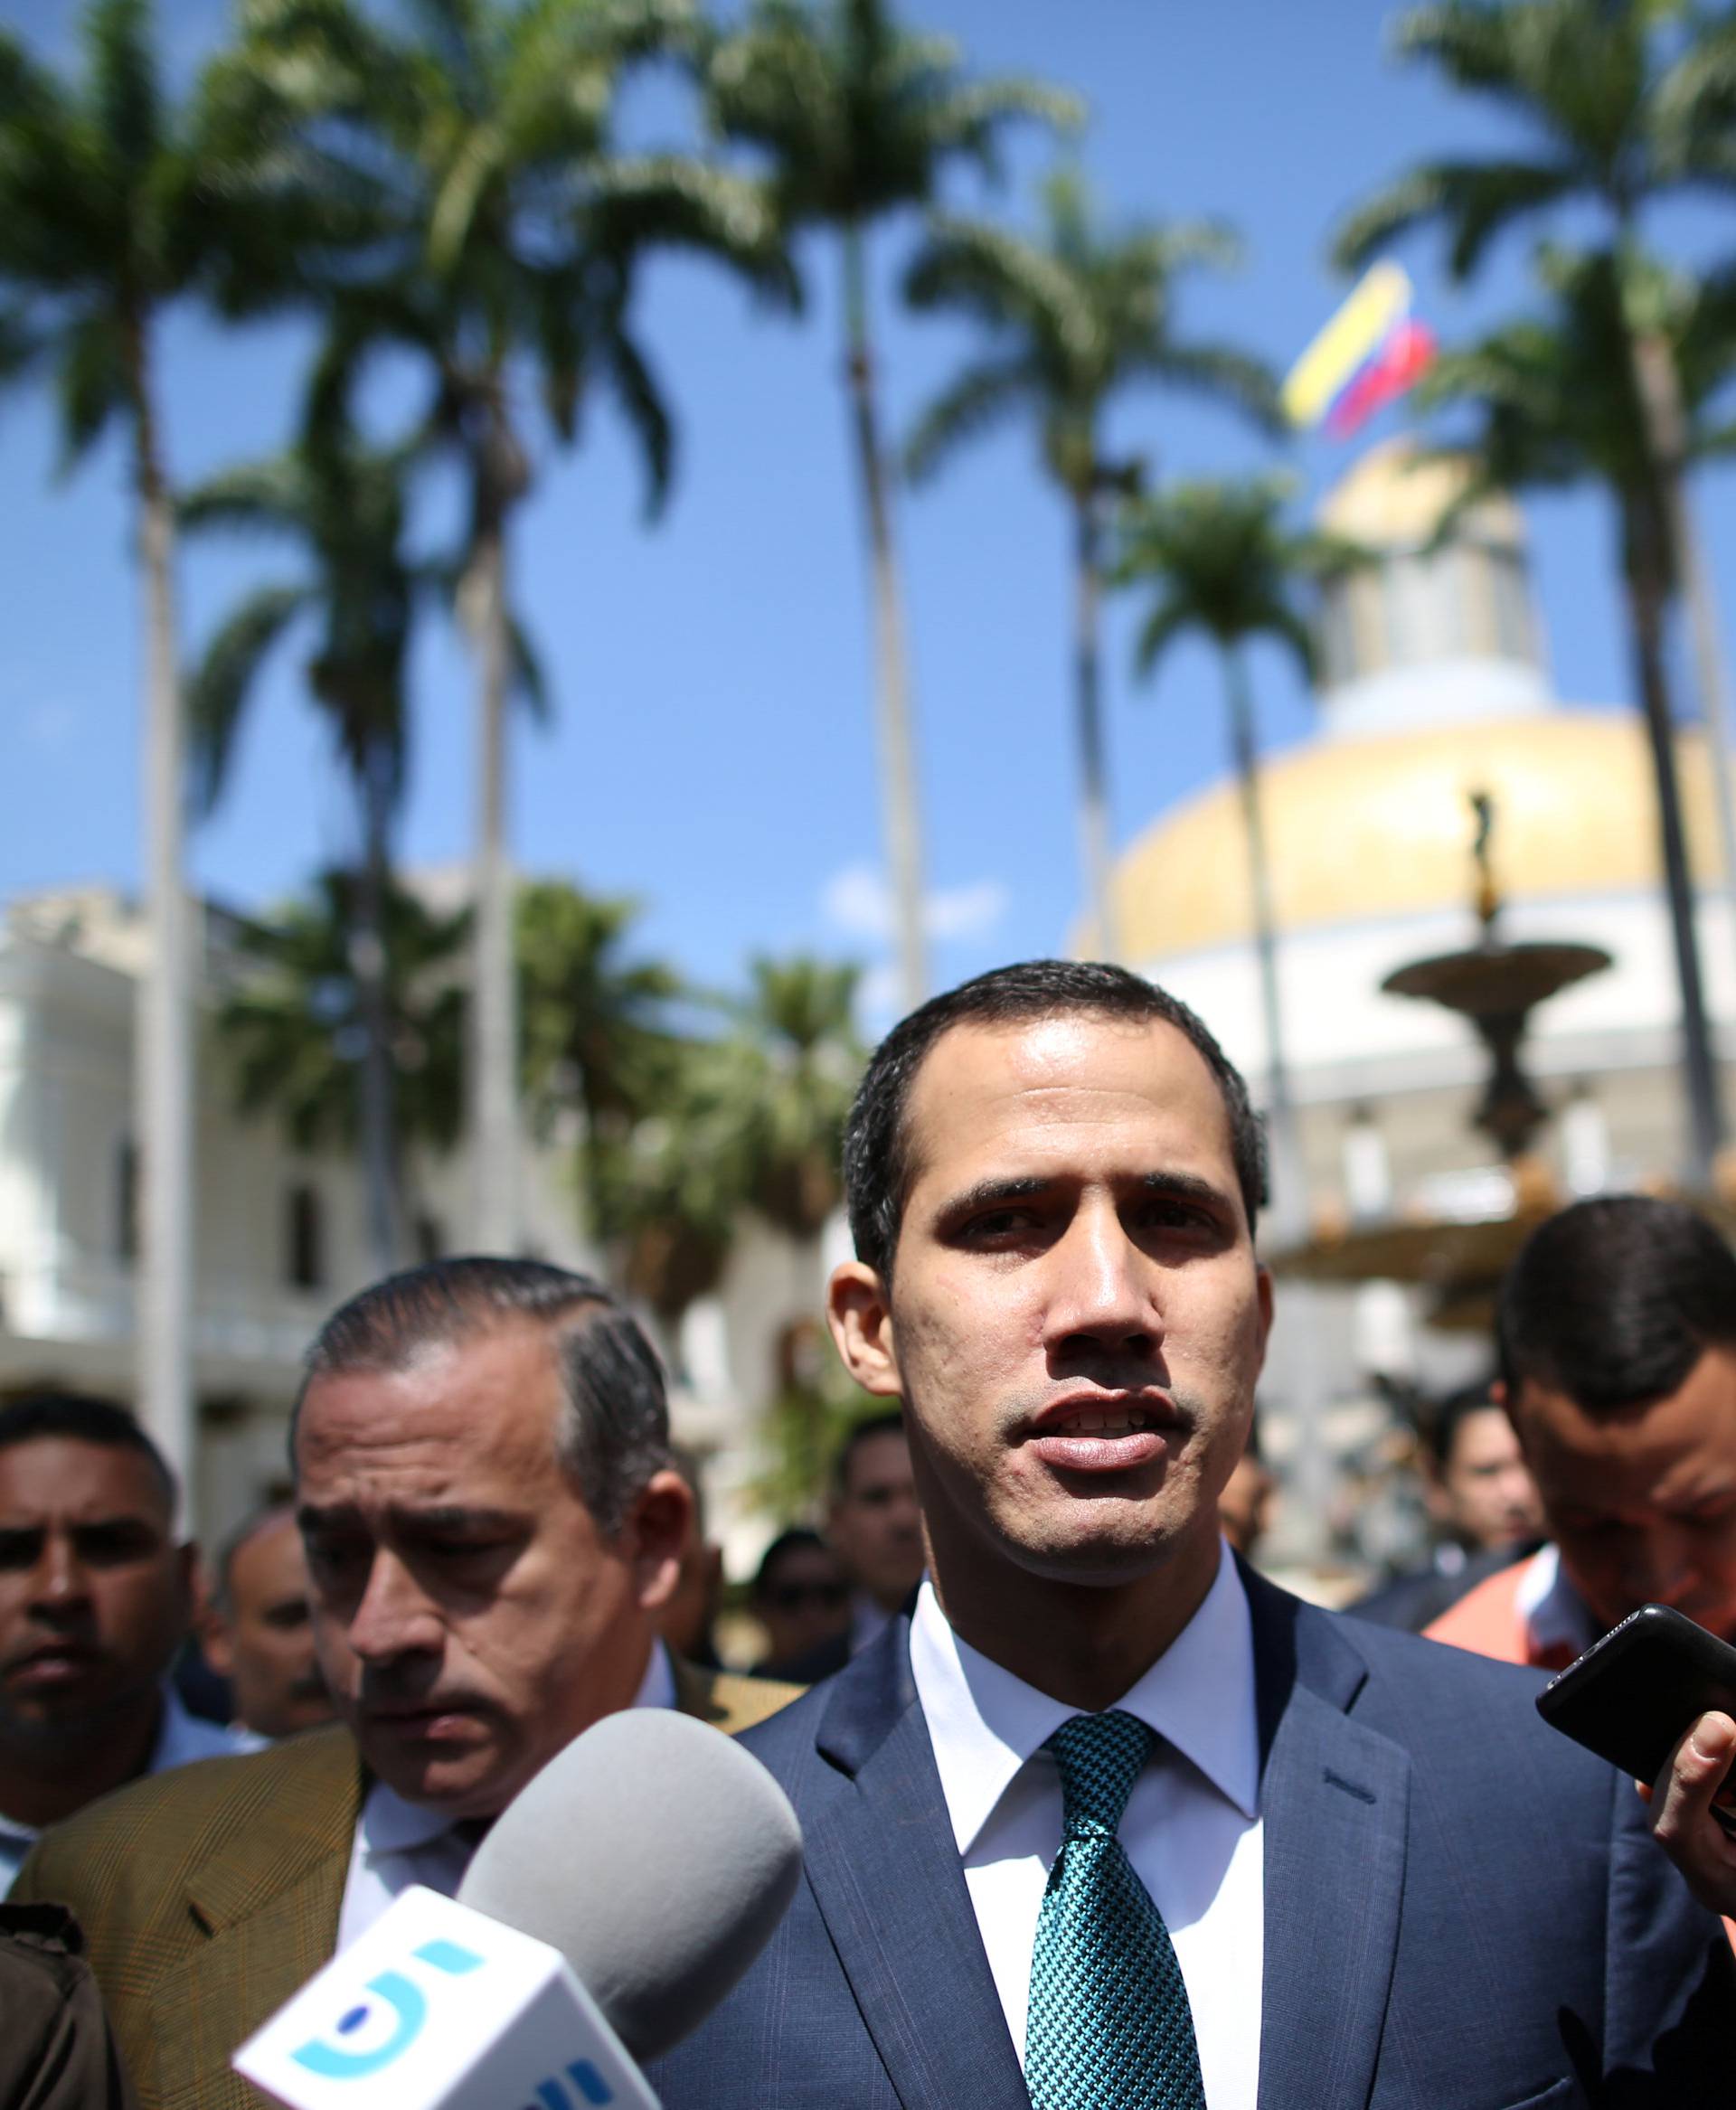 Venezuelan opposition leader Juan Guaido walks as he speaks to journalists before a news conference at the National Assembly in Caracas